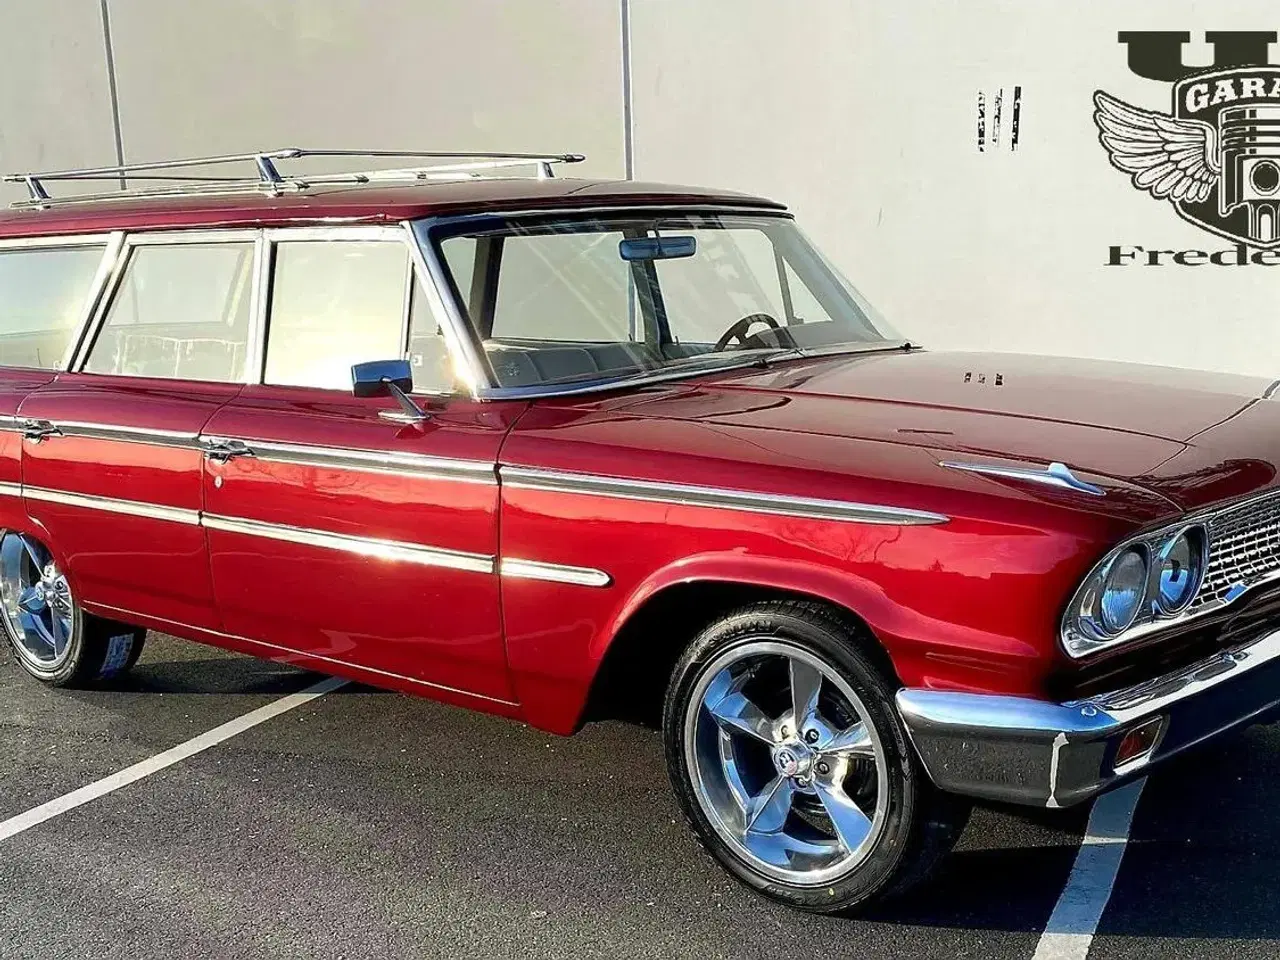 Billede 1 - 1963 Ford Galaxie Country Wagon